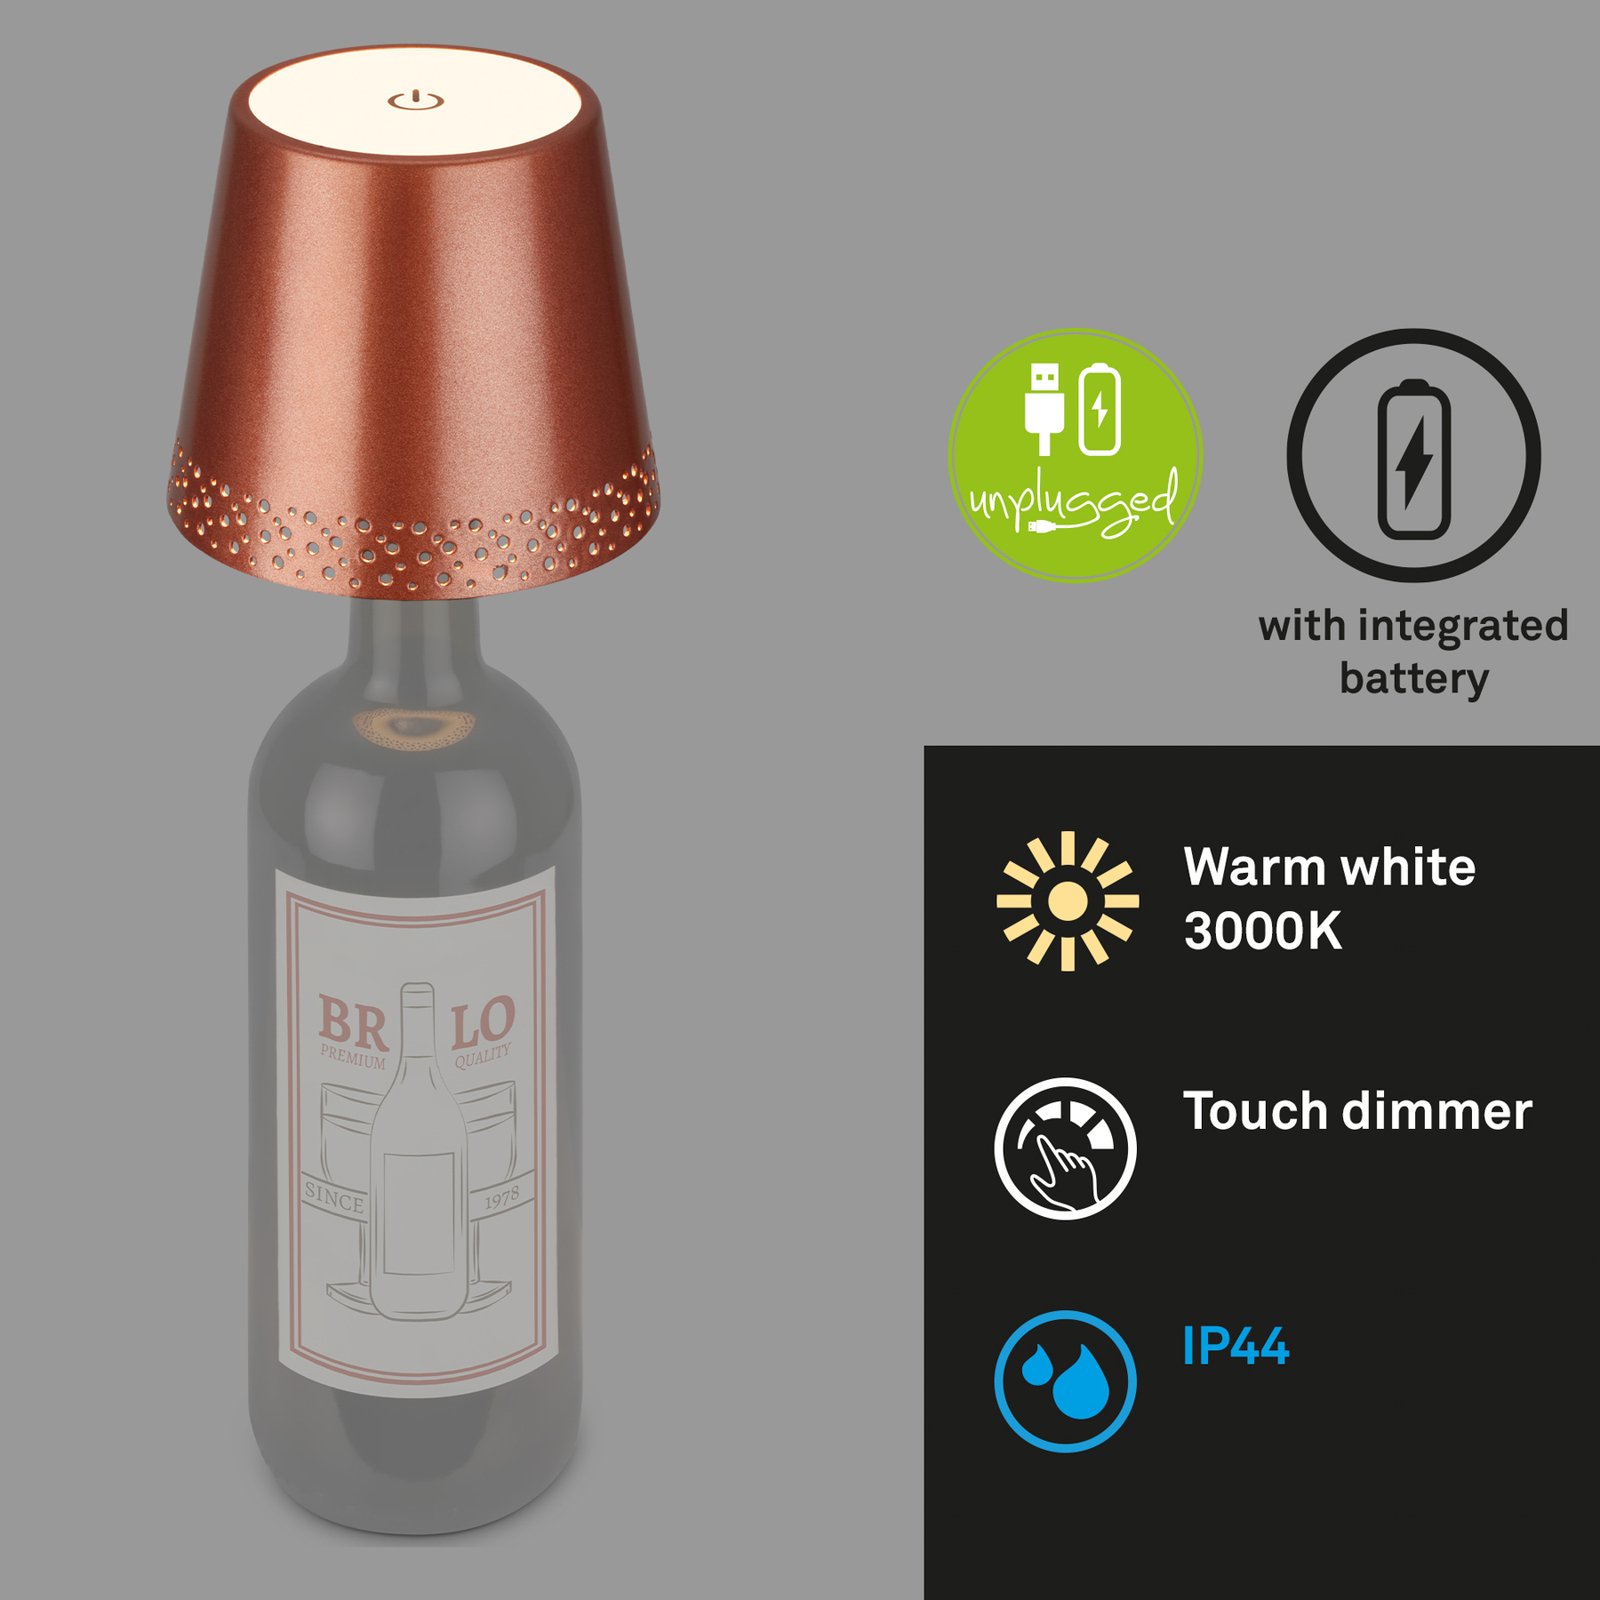 LED battery bottle light IP44 with a dimmer copper